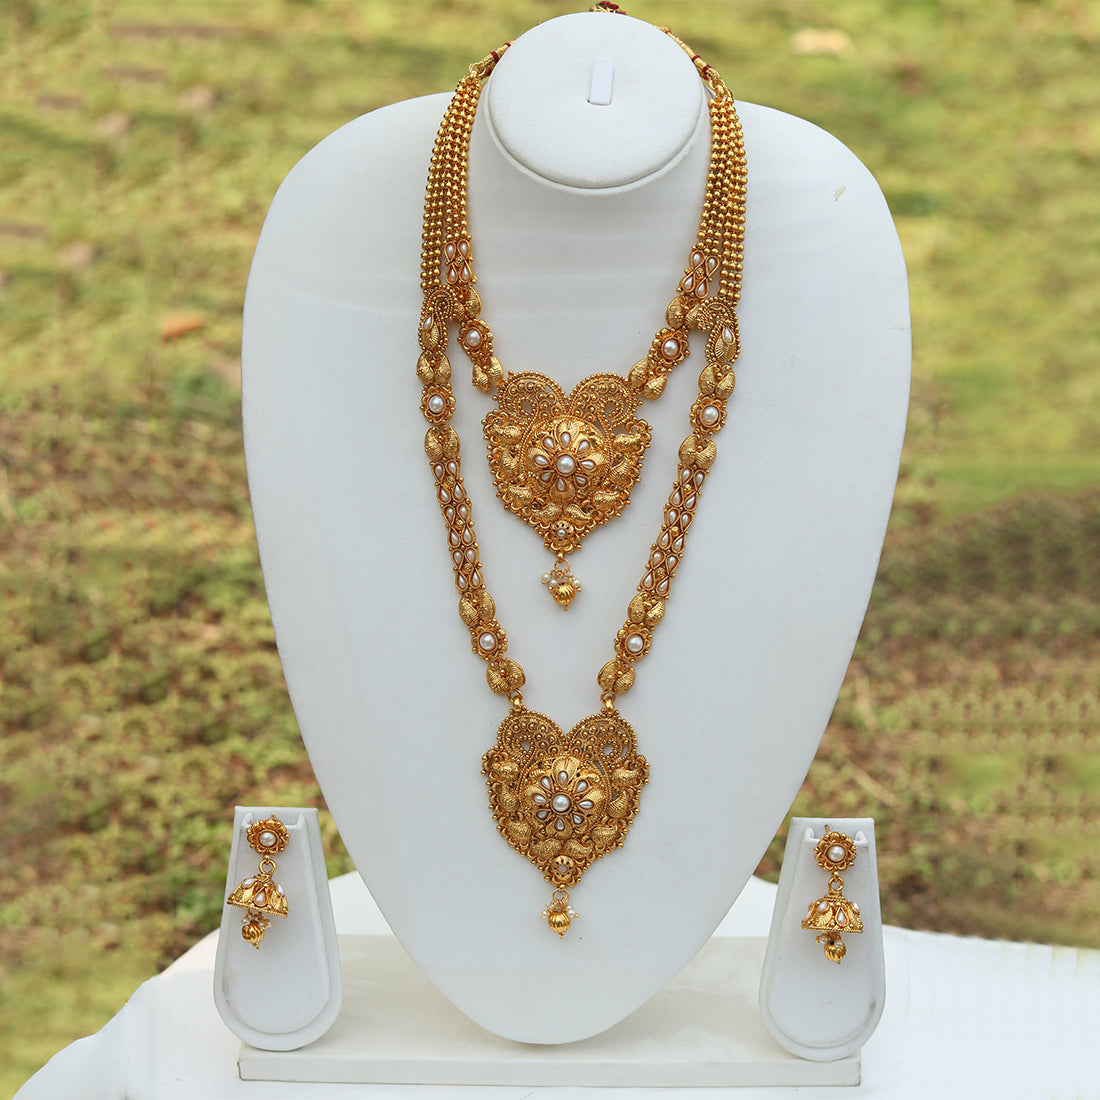 Beautiful Antique Gold Plated Mangalsutra Style Haram Wedding Necklace with Jhumki Earring Set